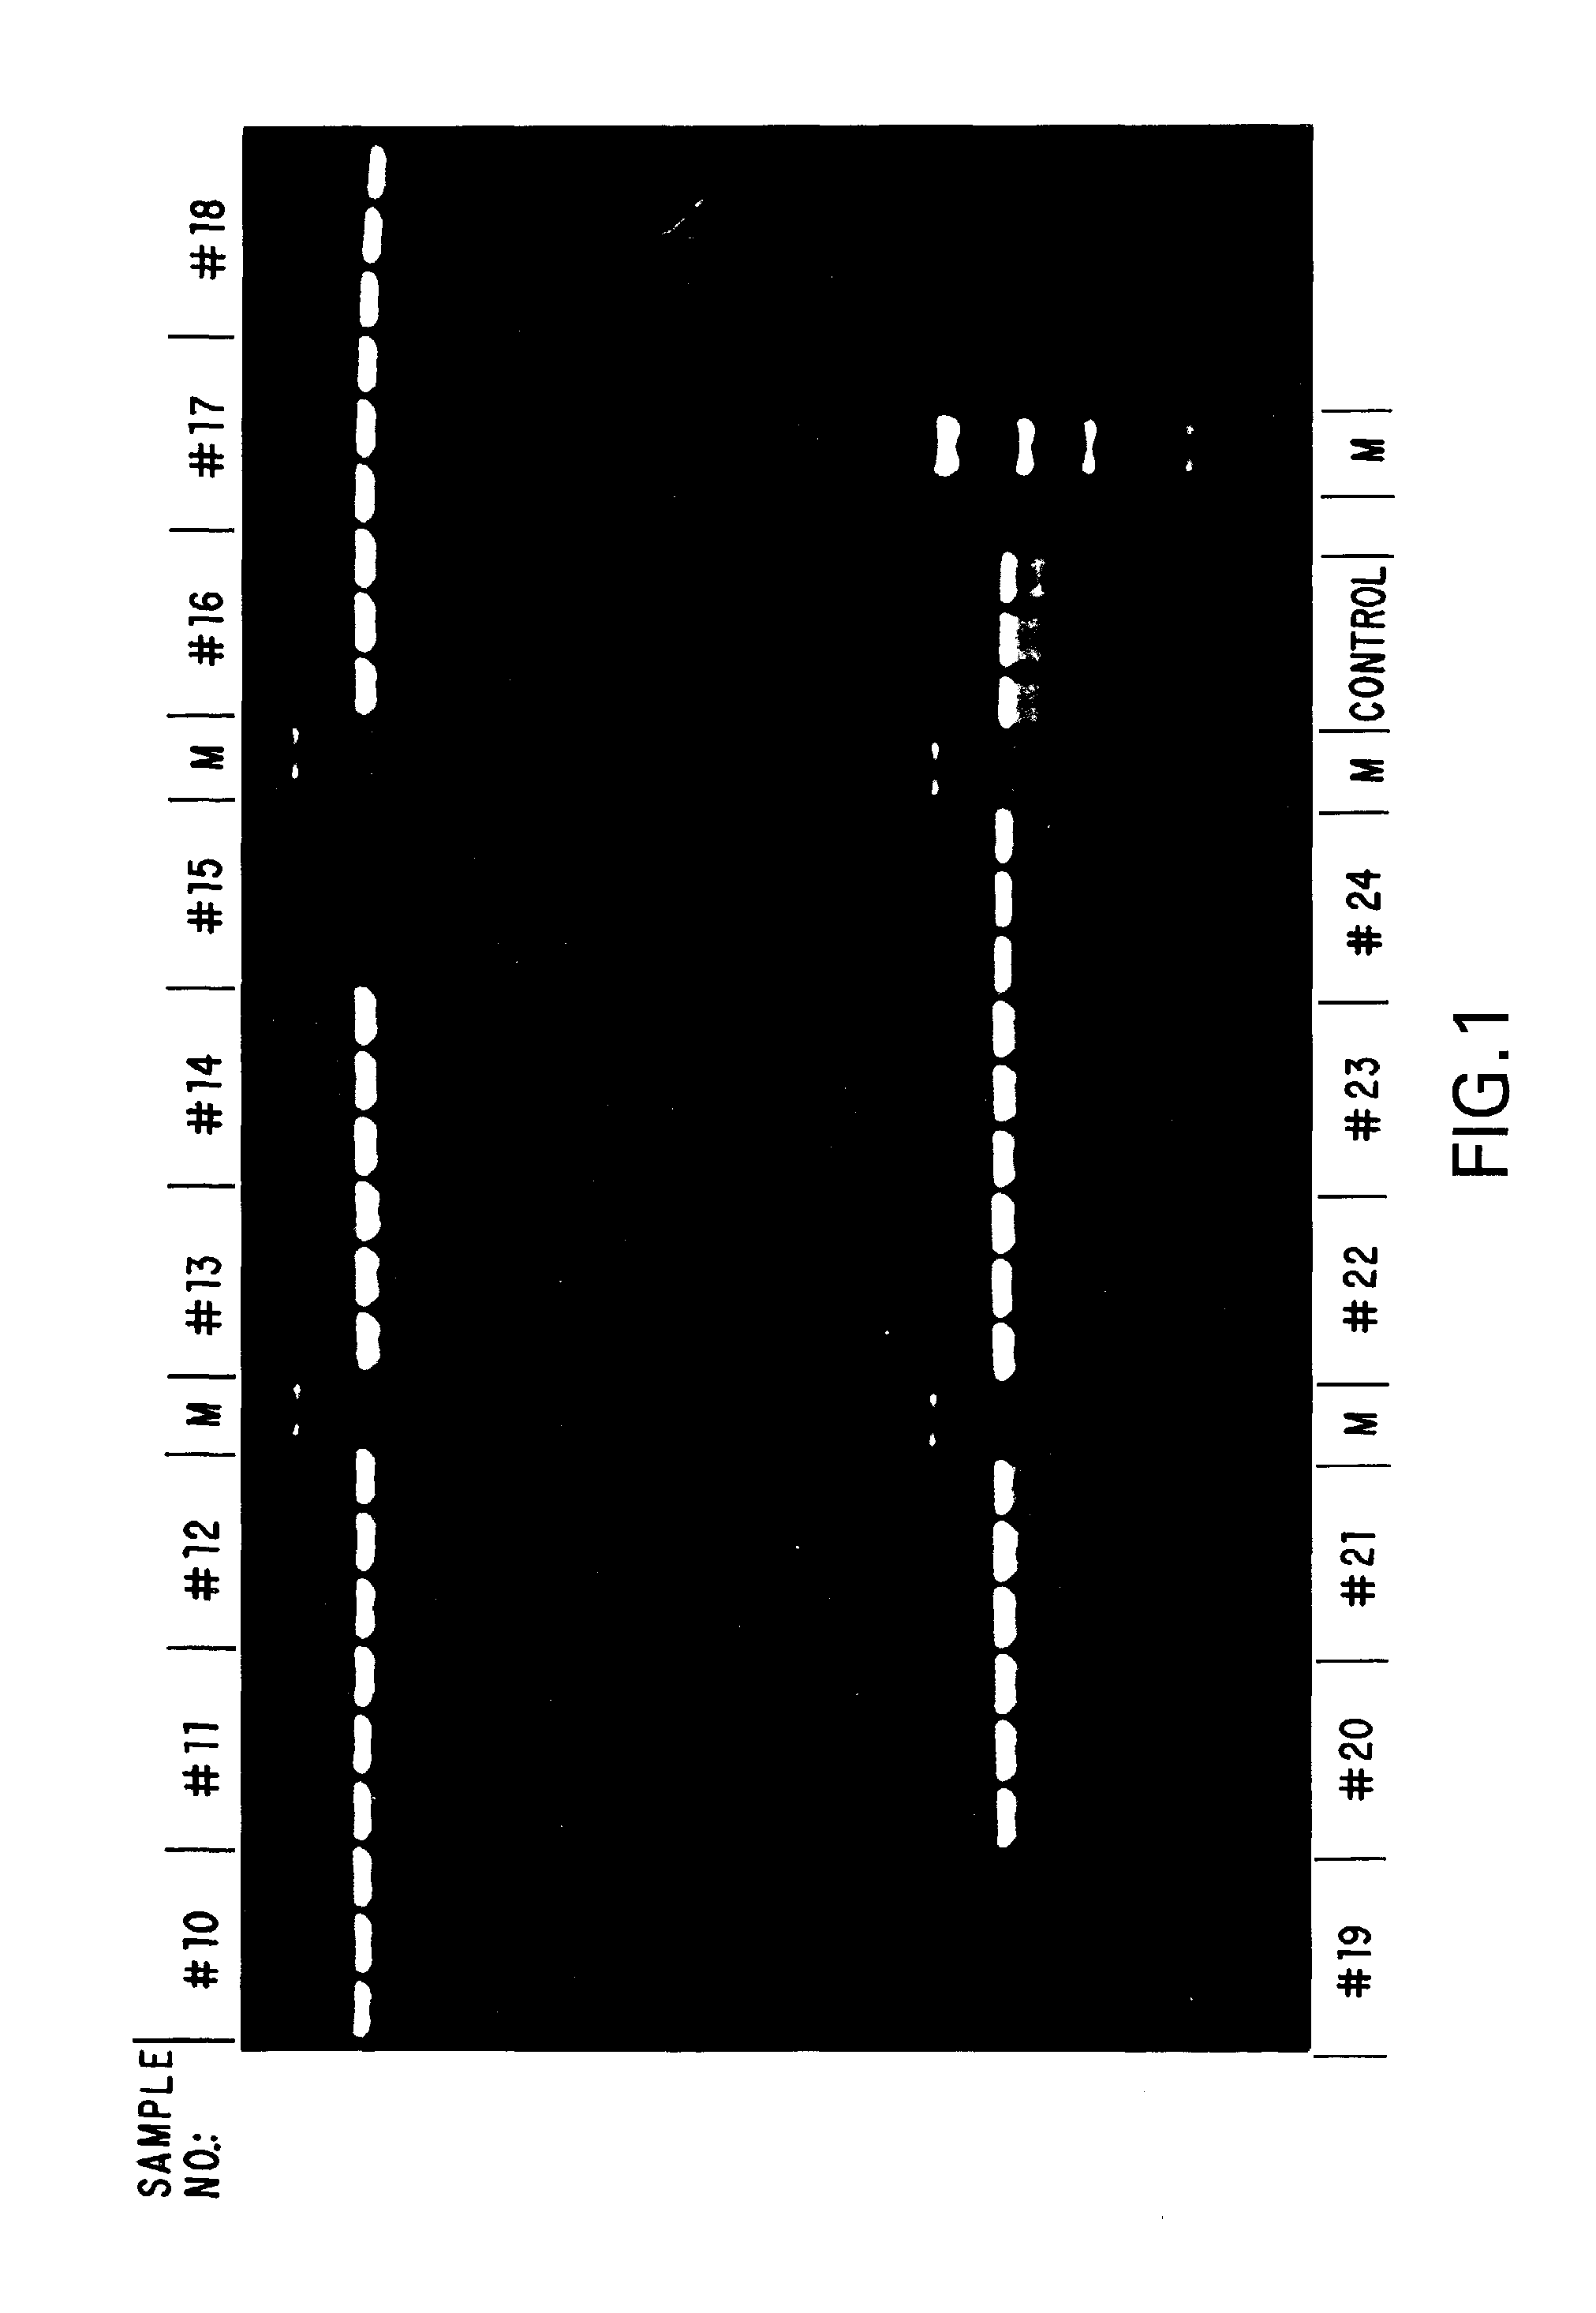 Stable compositions for nucleic acid amplification and sequencing